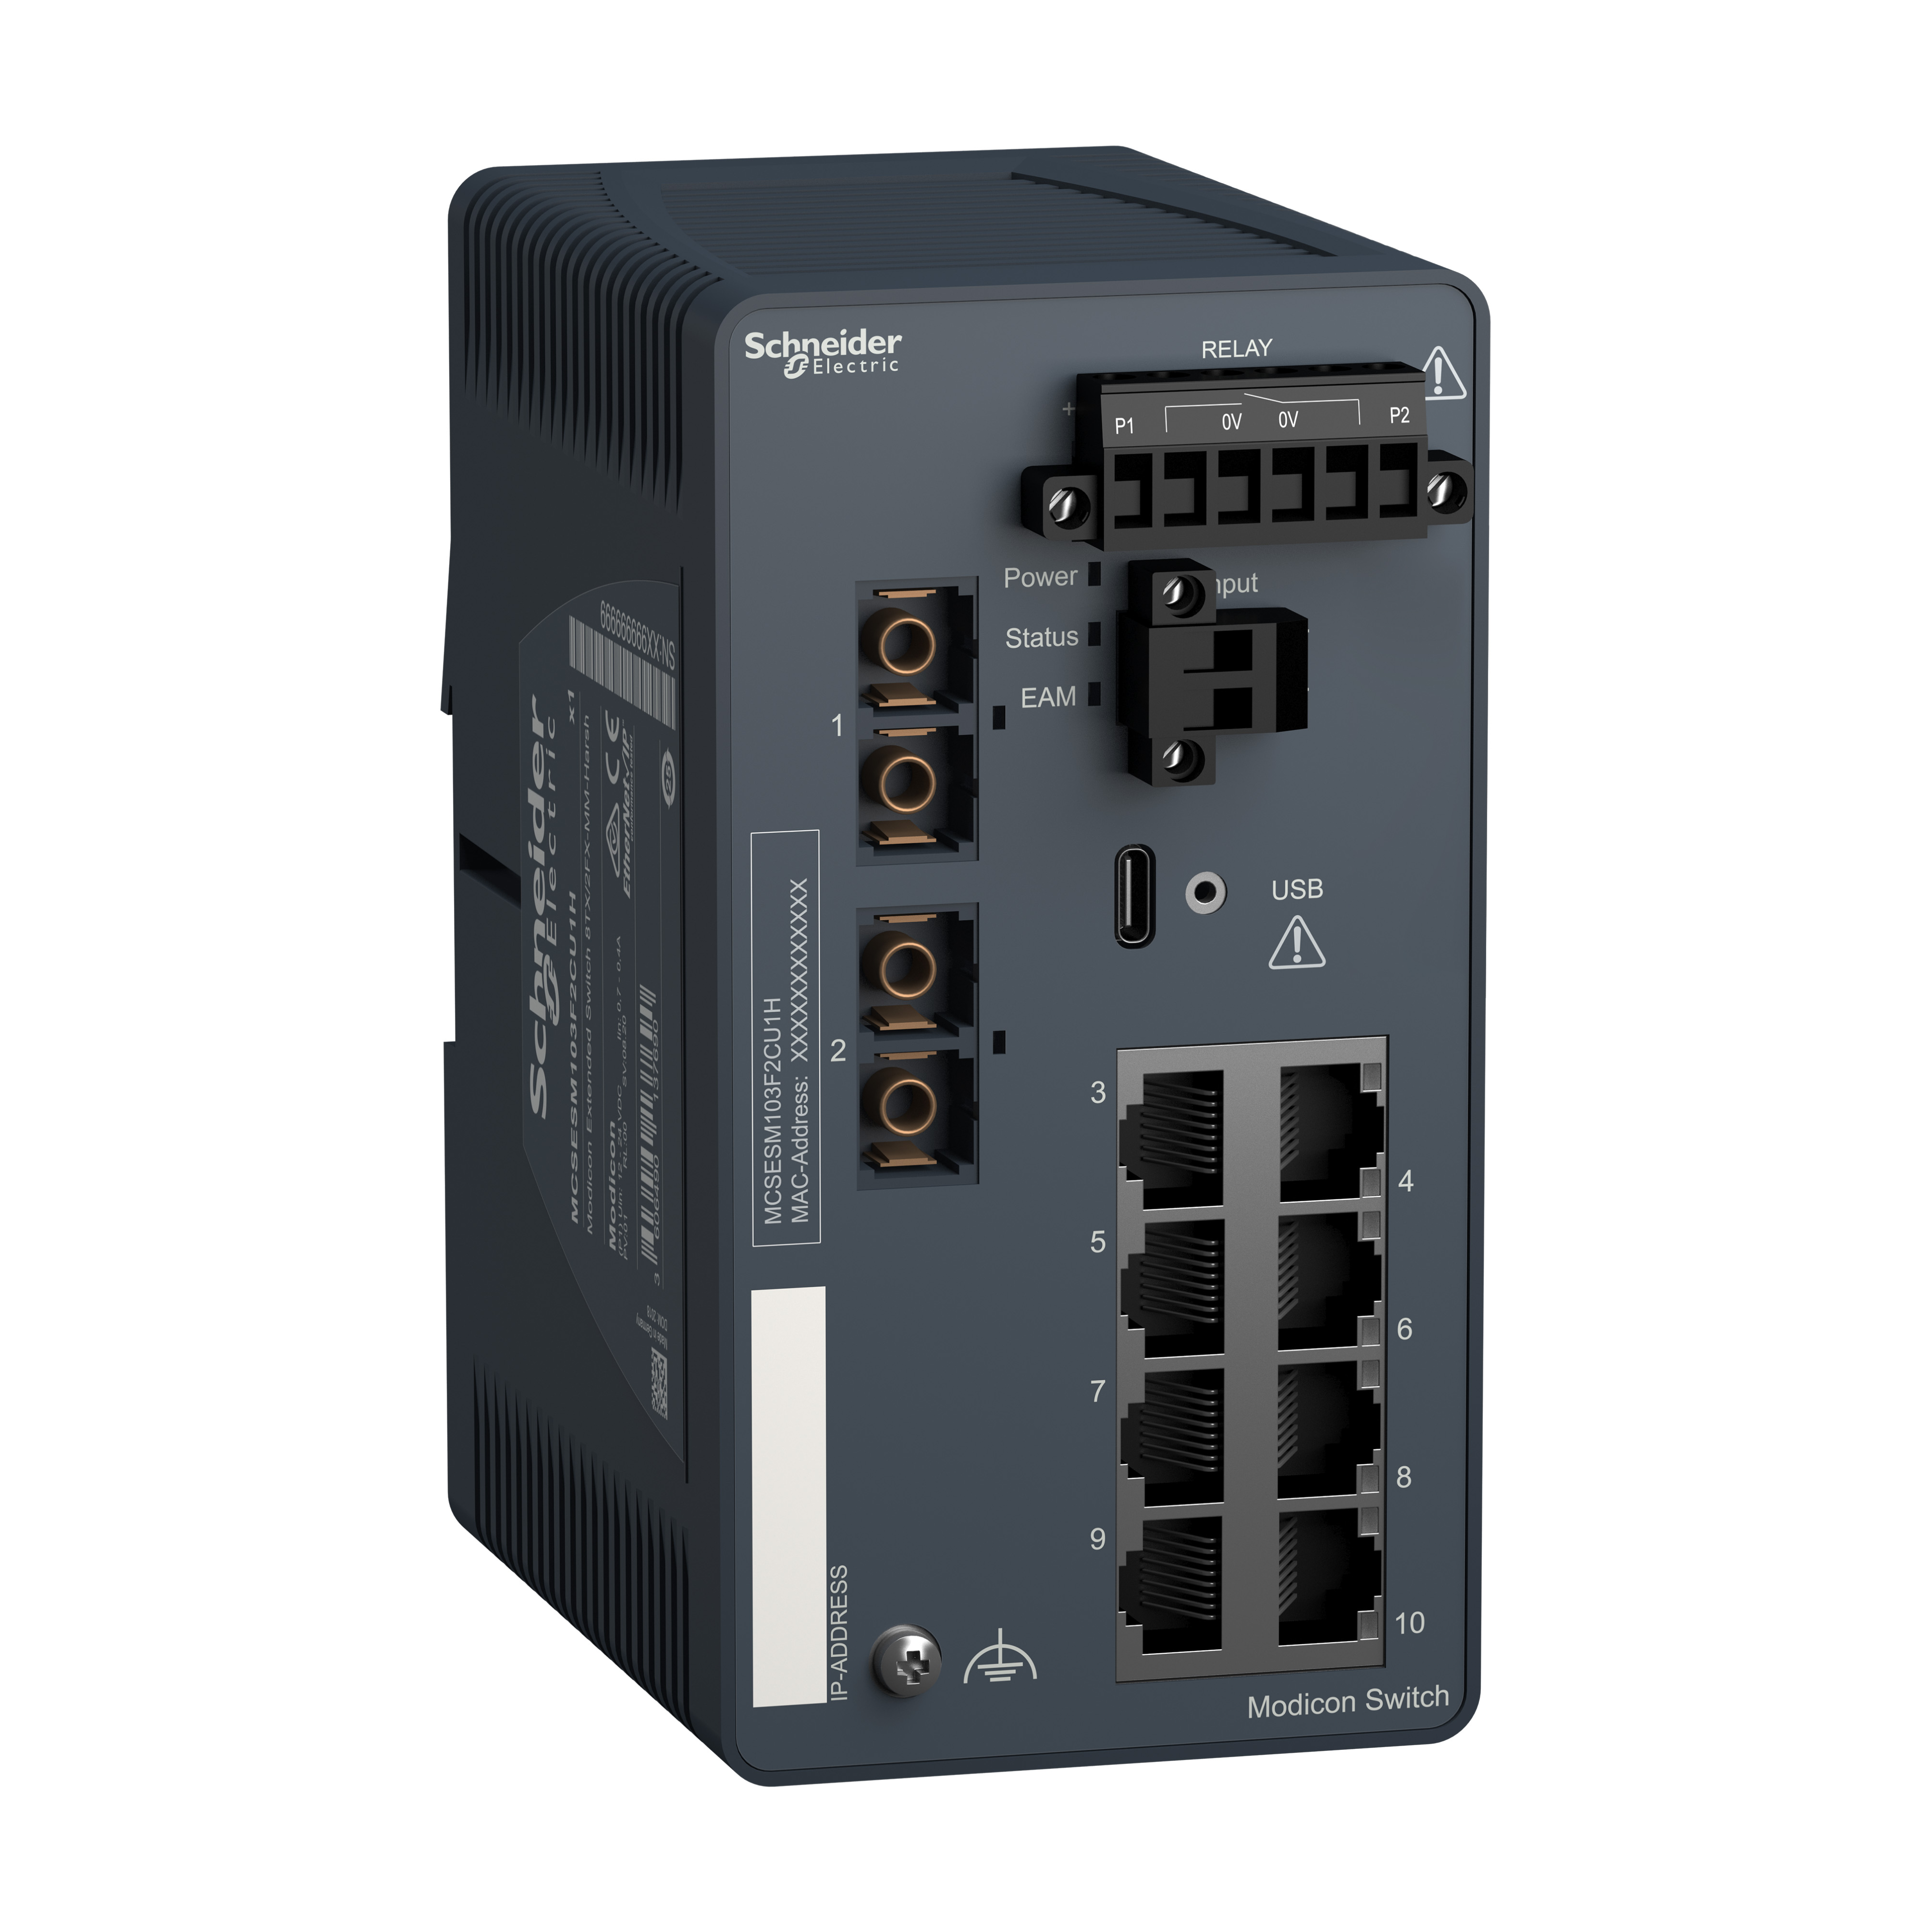 Modicon Extended Managed Switch - 8 ports for copper + 2 ports for fiber optic multimode - Harsh